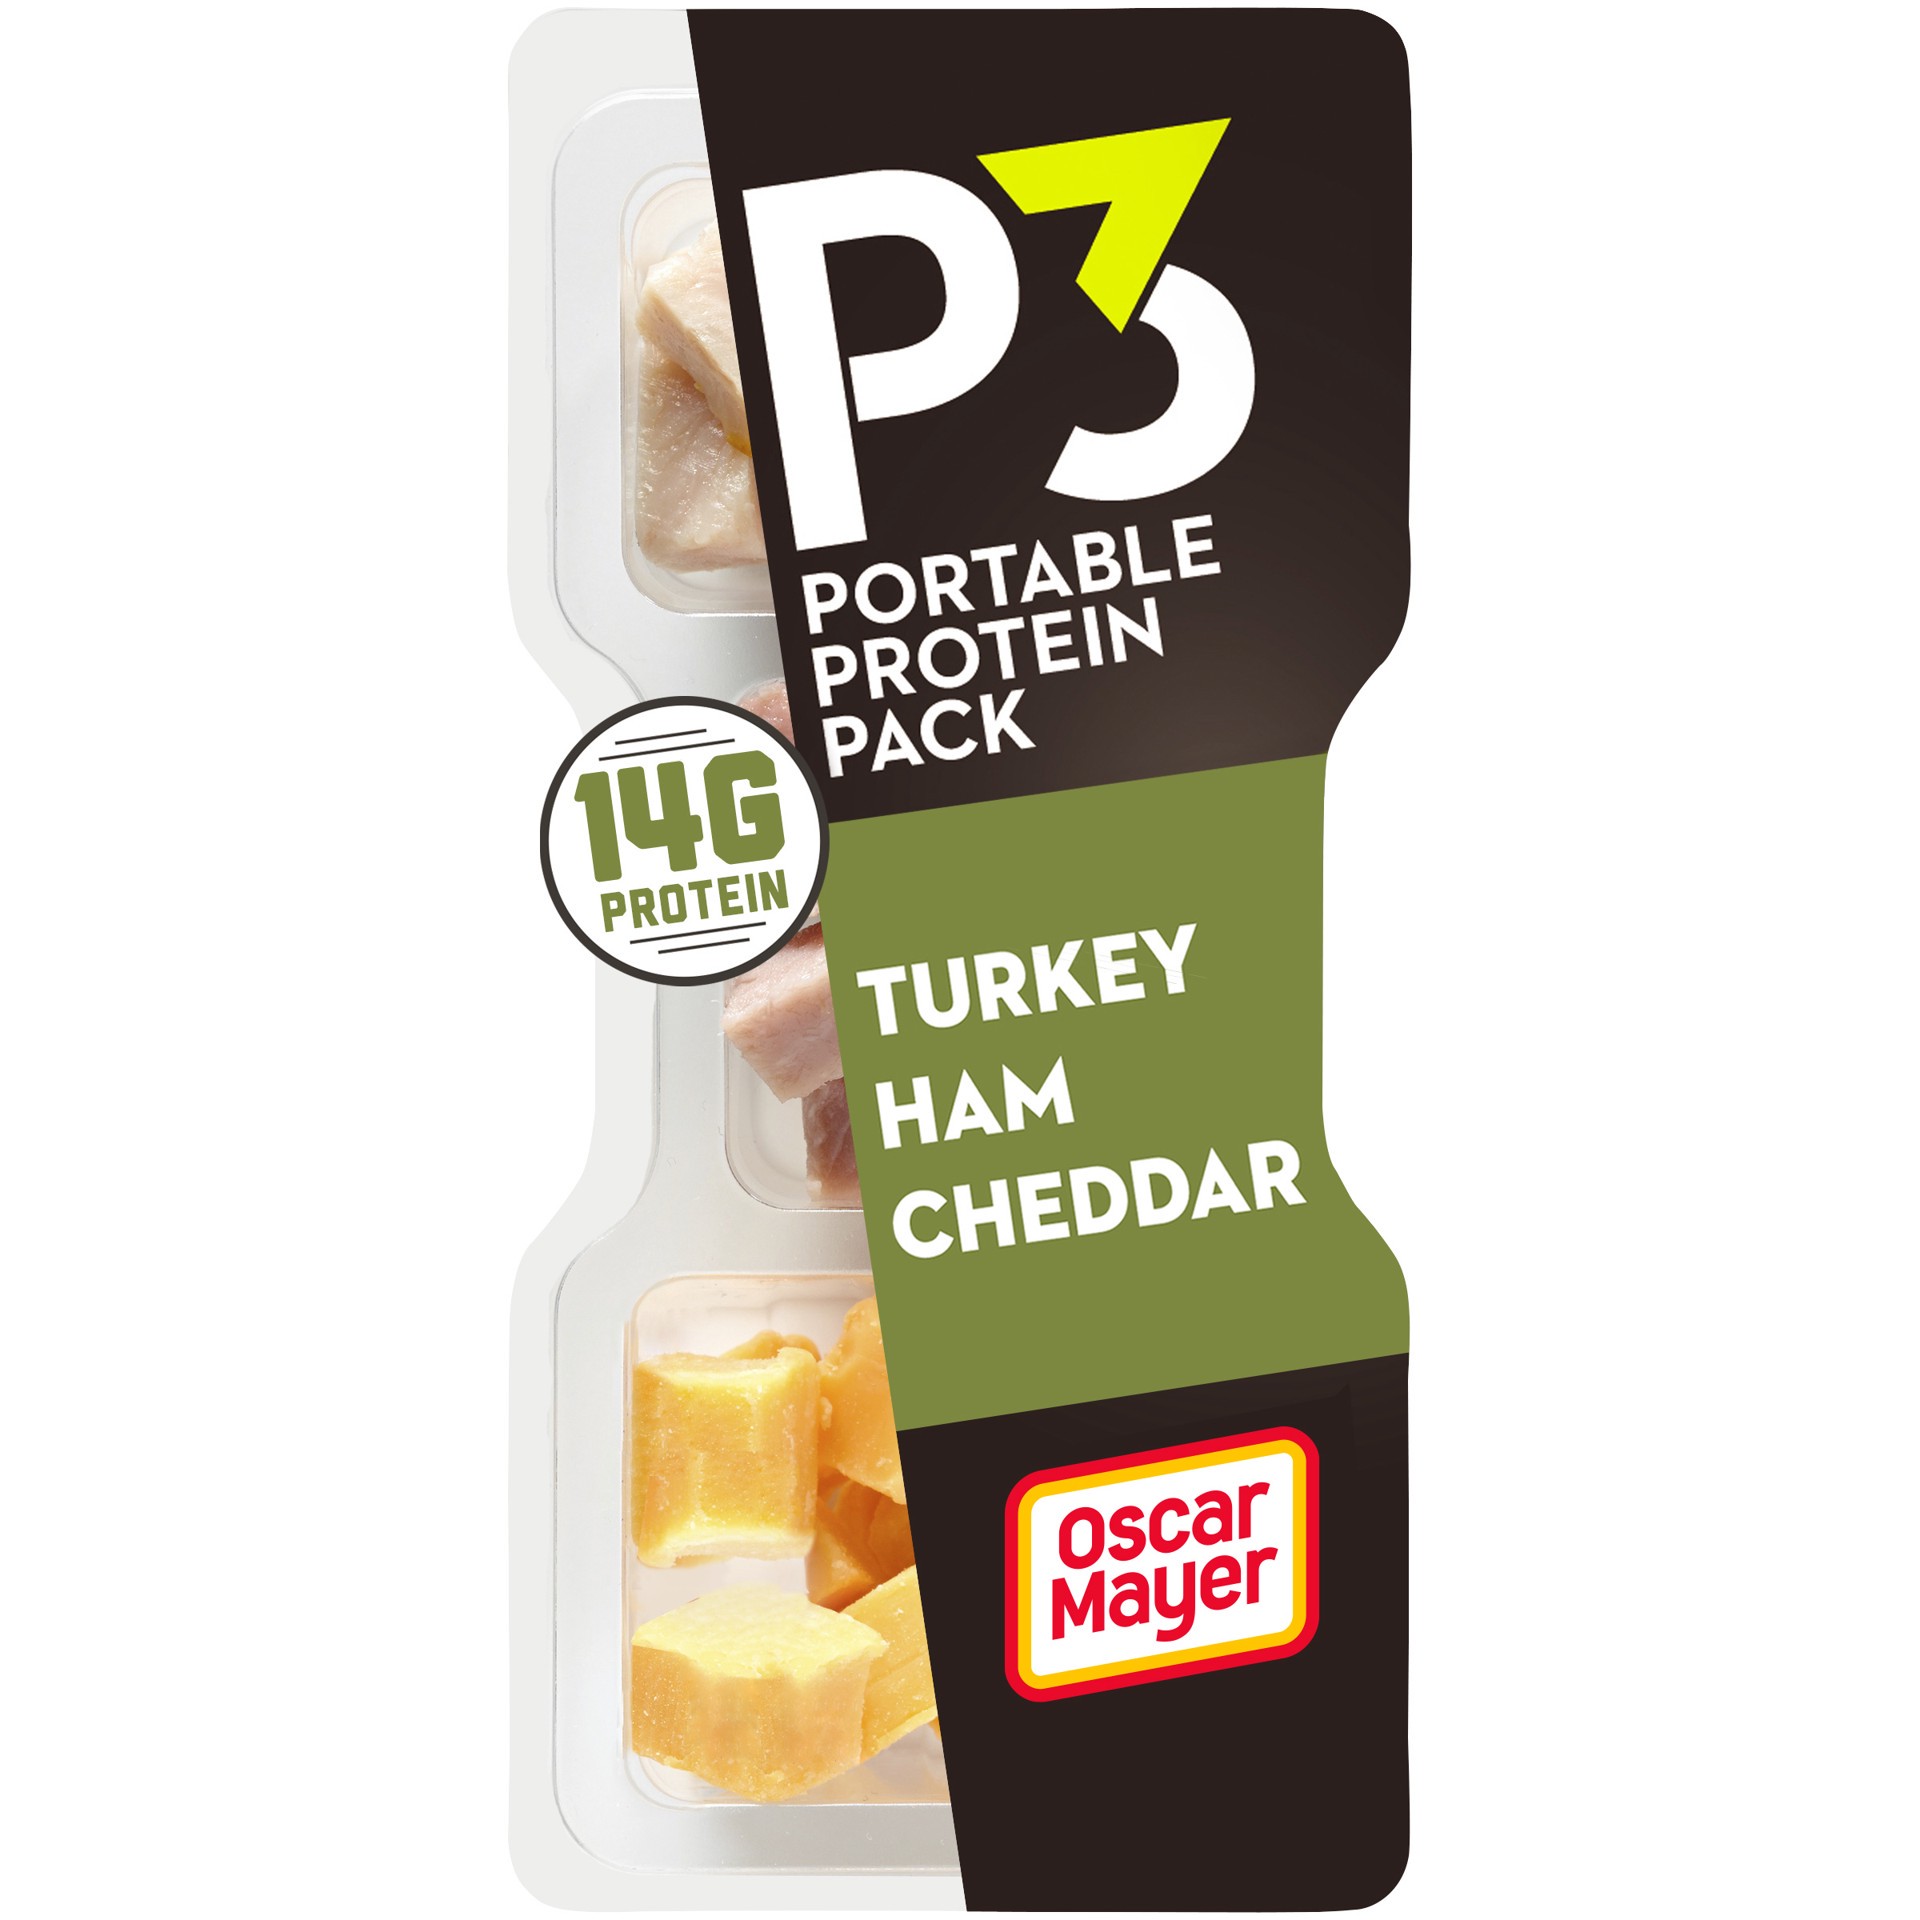 slide 1 of 5, P3 Portable Protein Snack Pack with Turkey, Ham & Cheddar Cheese, 2.3 oz Tray, 2.3 oz